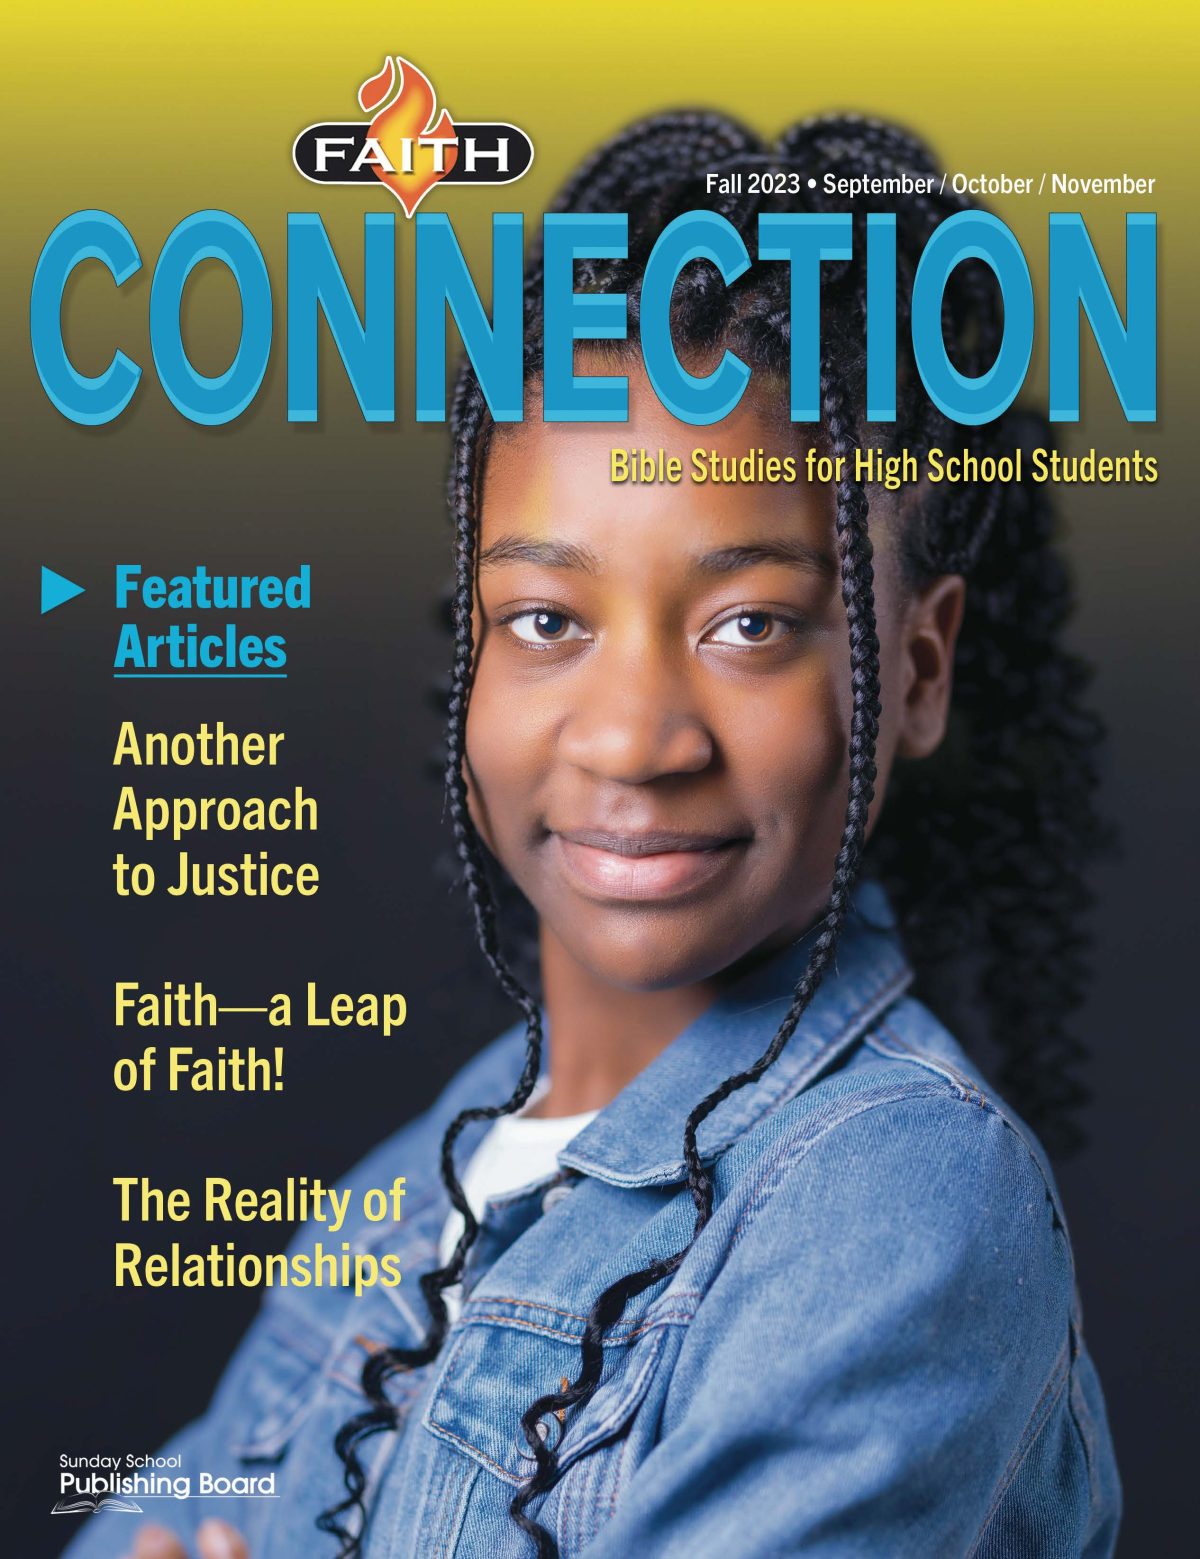 faith-connection-bible-studies-for-high-school-students-fall-2023